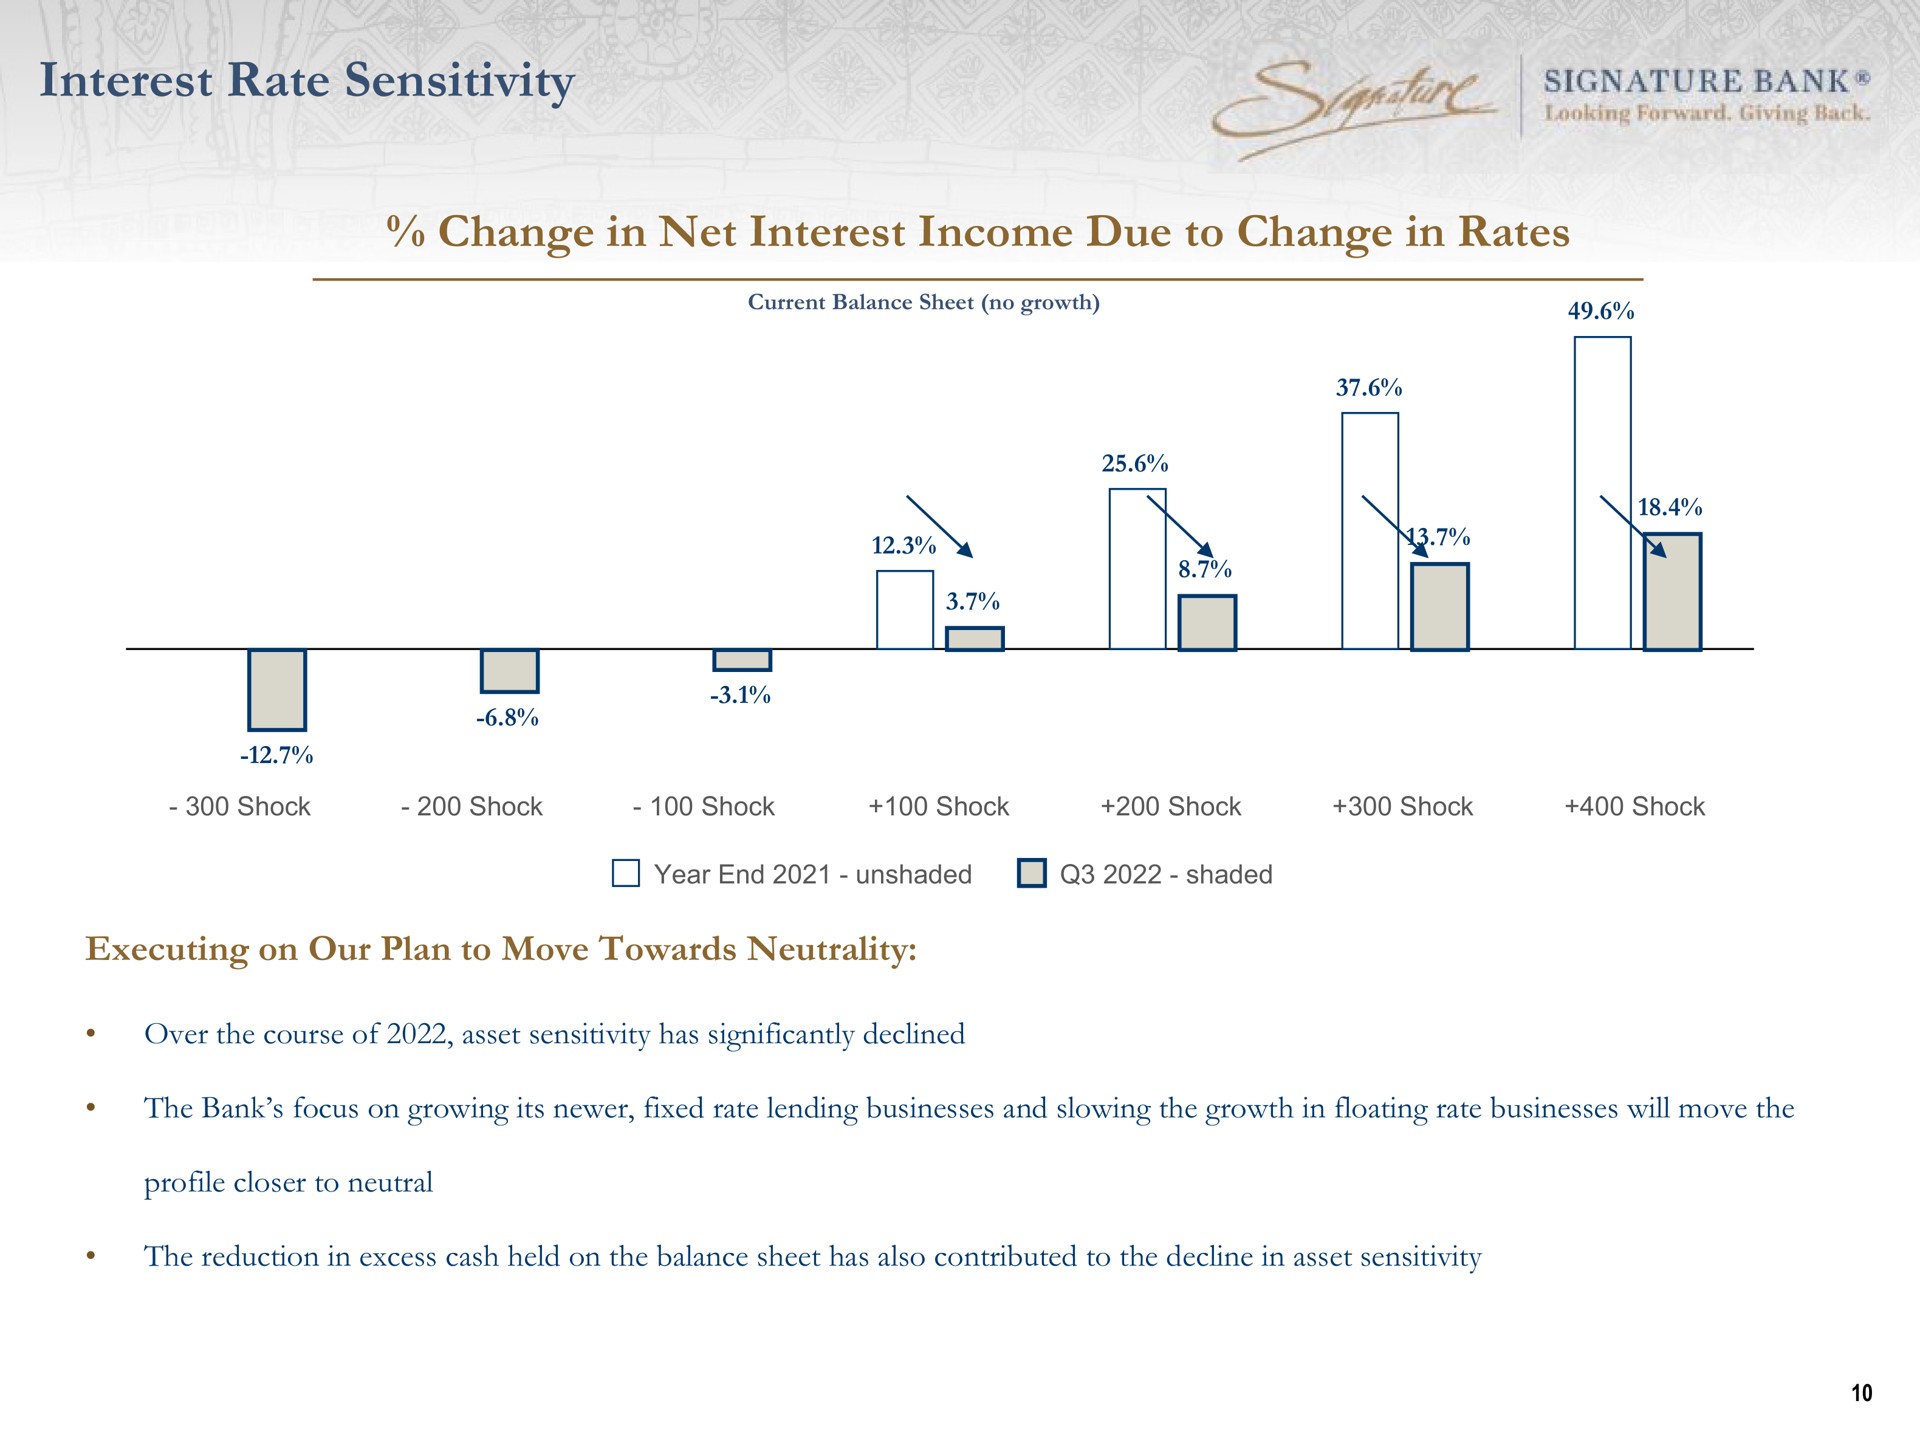 interest rate sensitivity change in net interest income due to change in rates signature bank | Signature Bank